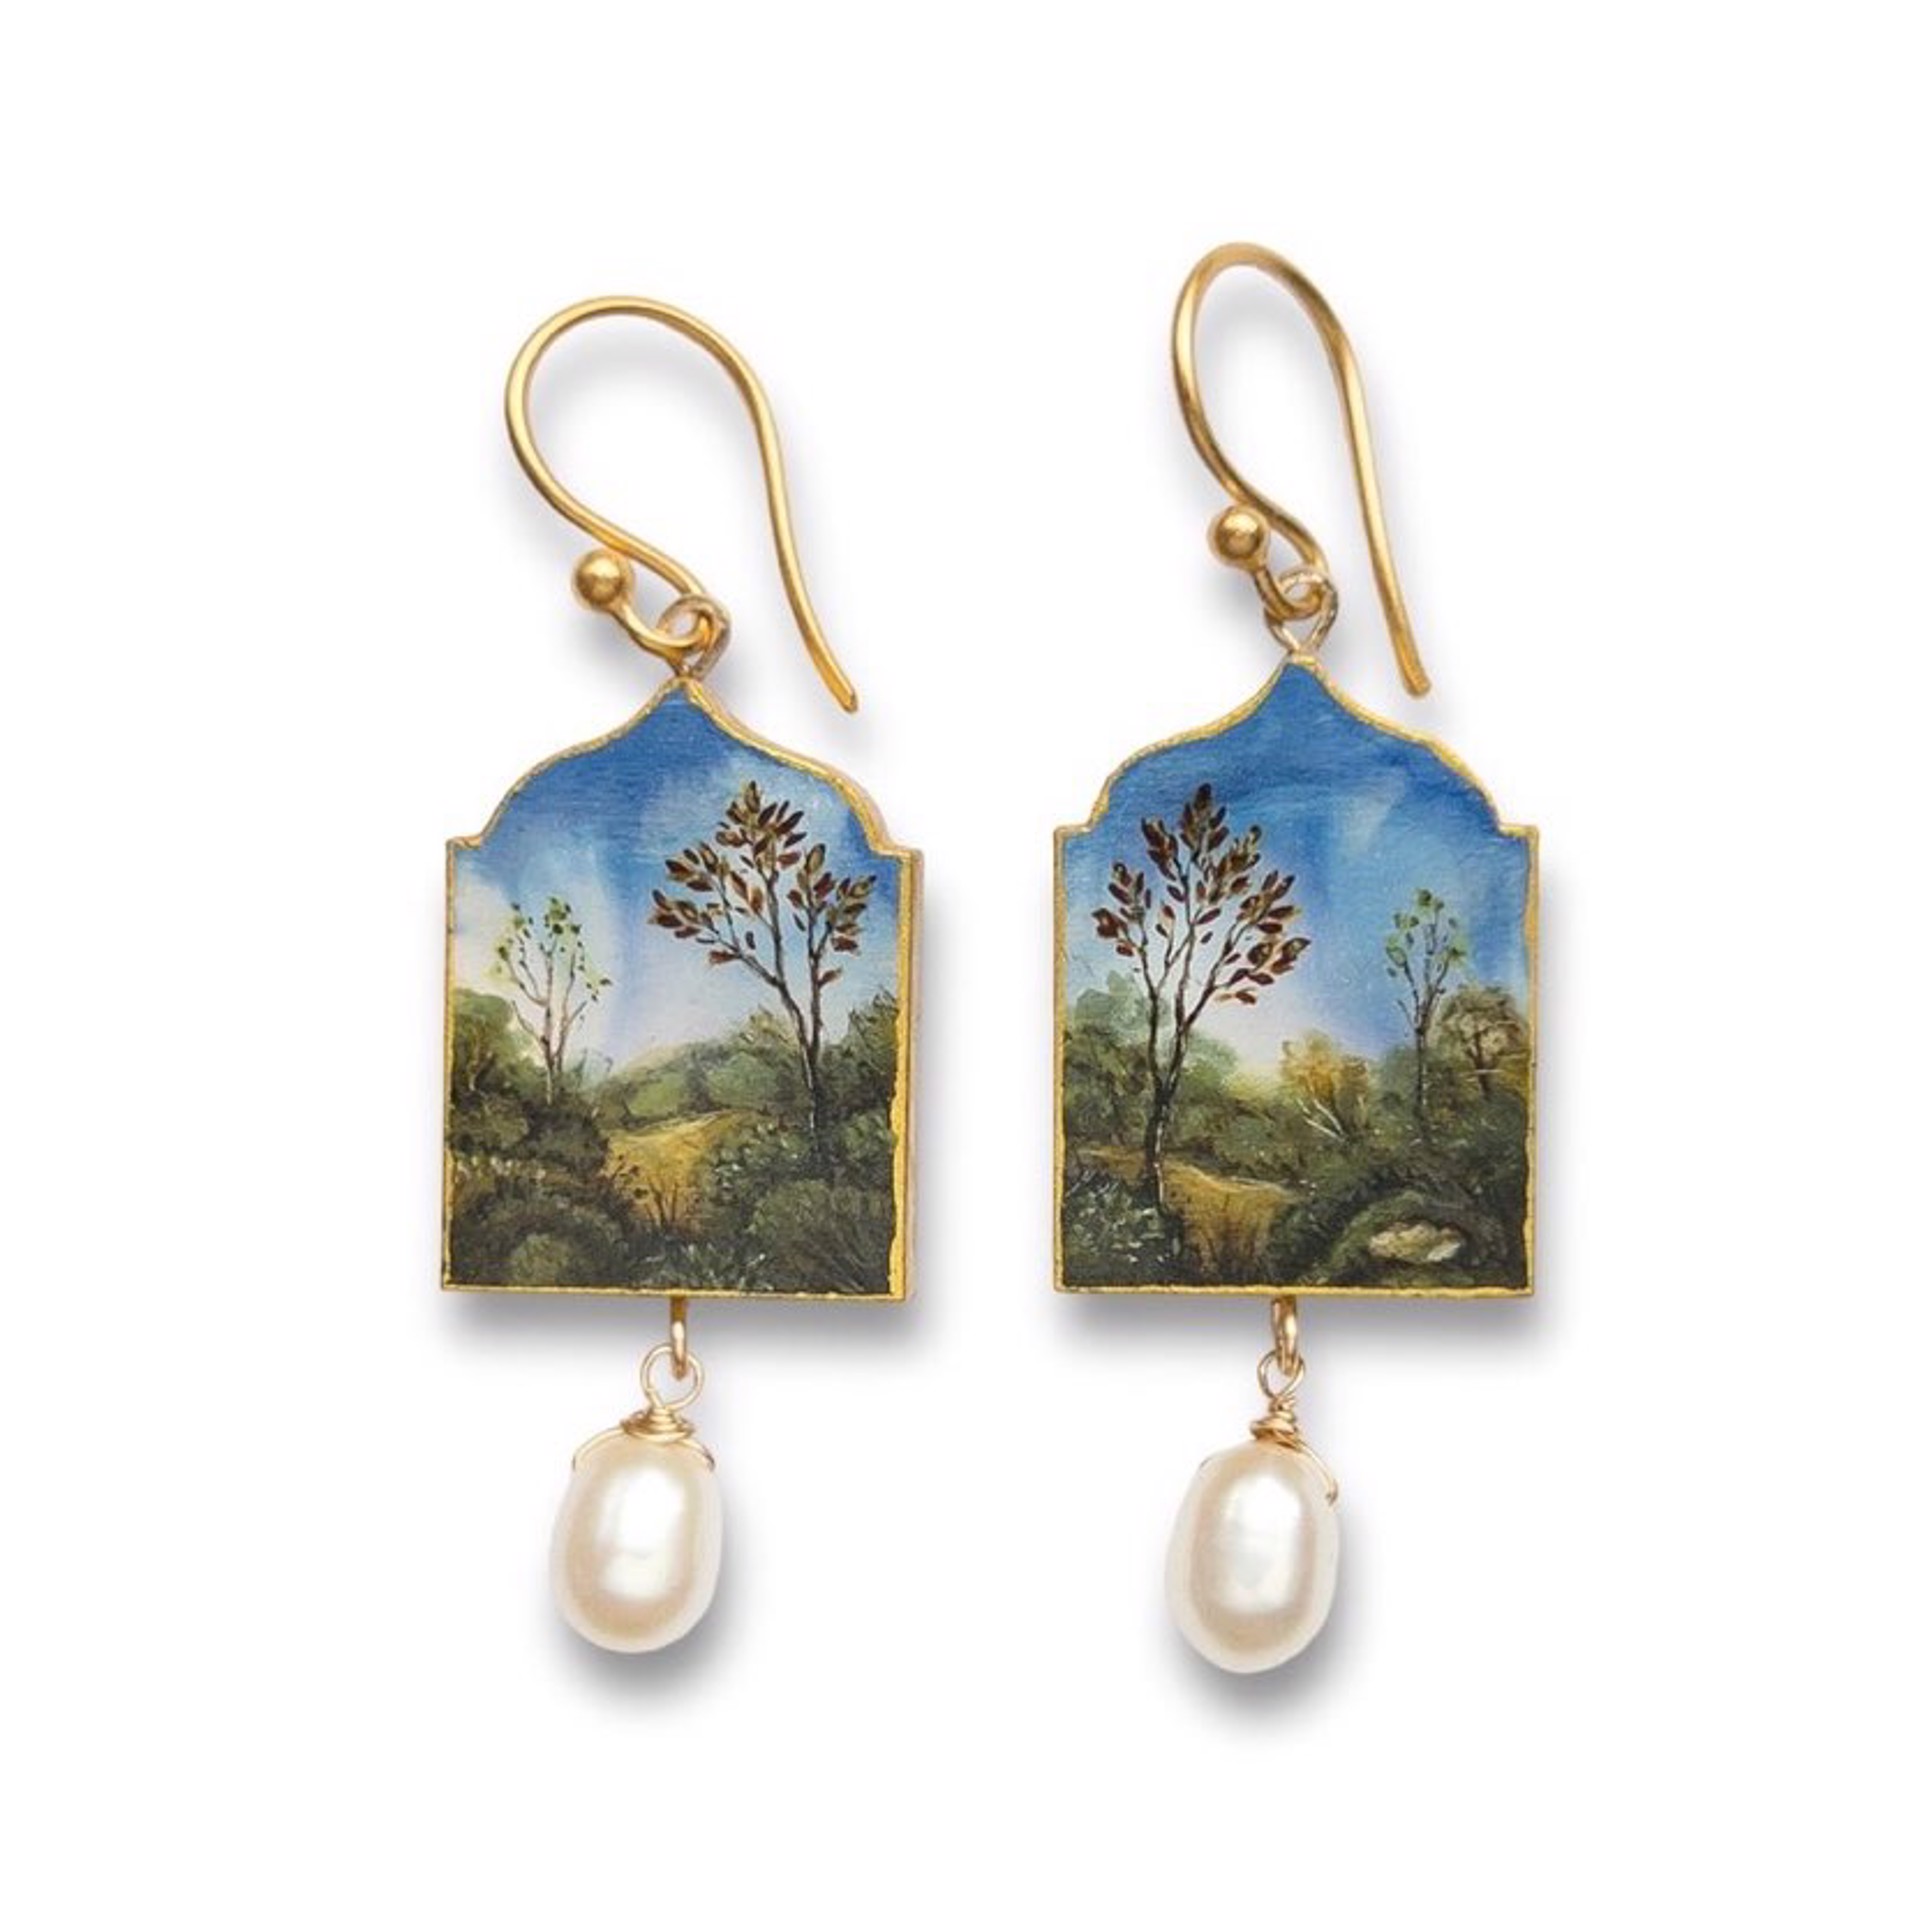 Autumn Tree Earrings with Pearl by Christina Goodman